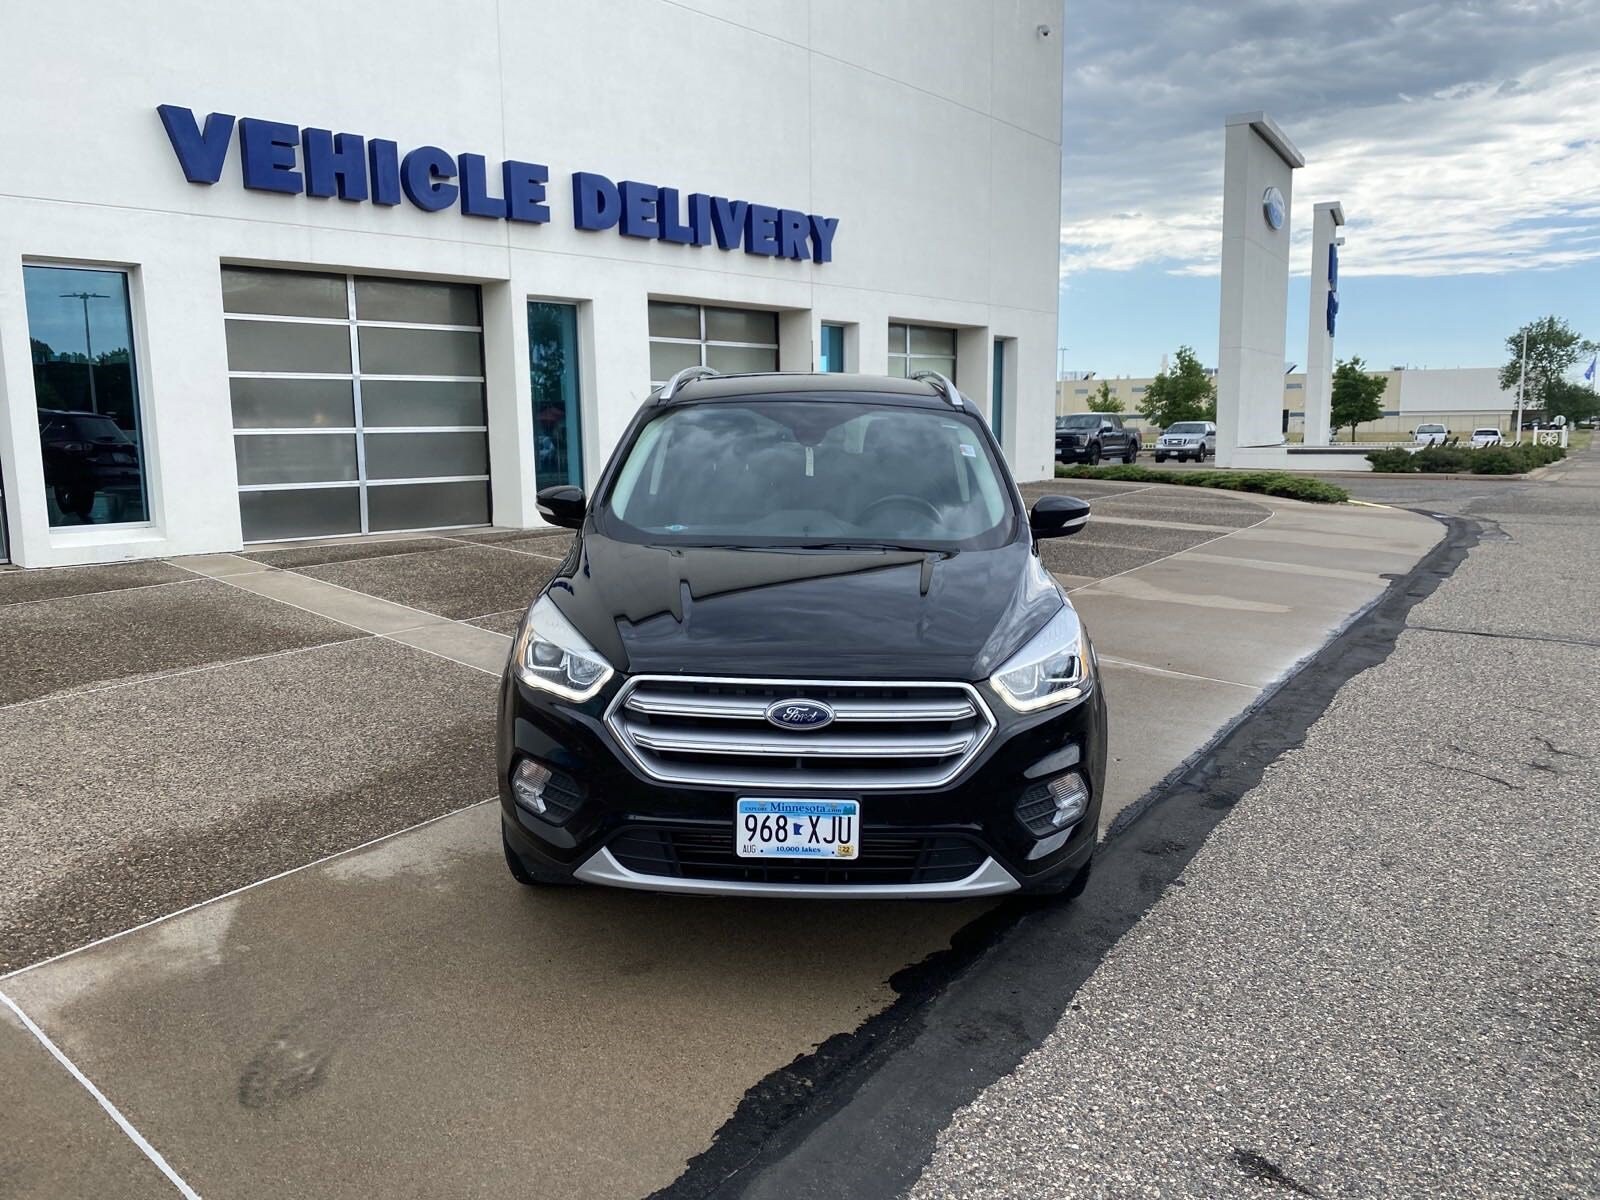 Used 2017 Ford Escape Titanium with VIN 1FMCU9J98HUE73549 for sale in Baxter, Minnesota